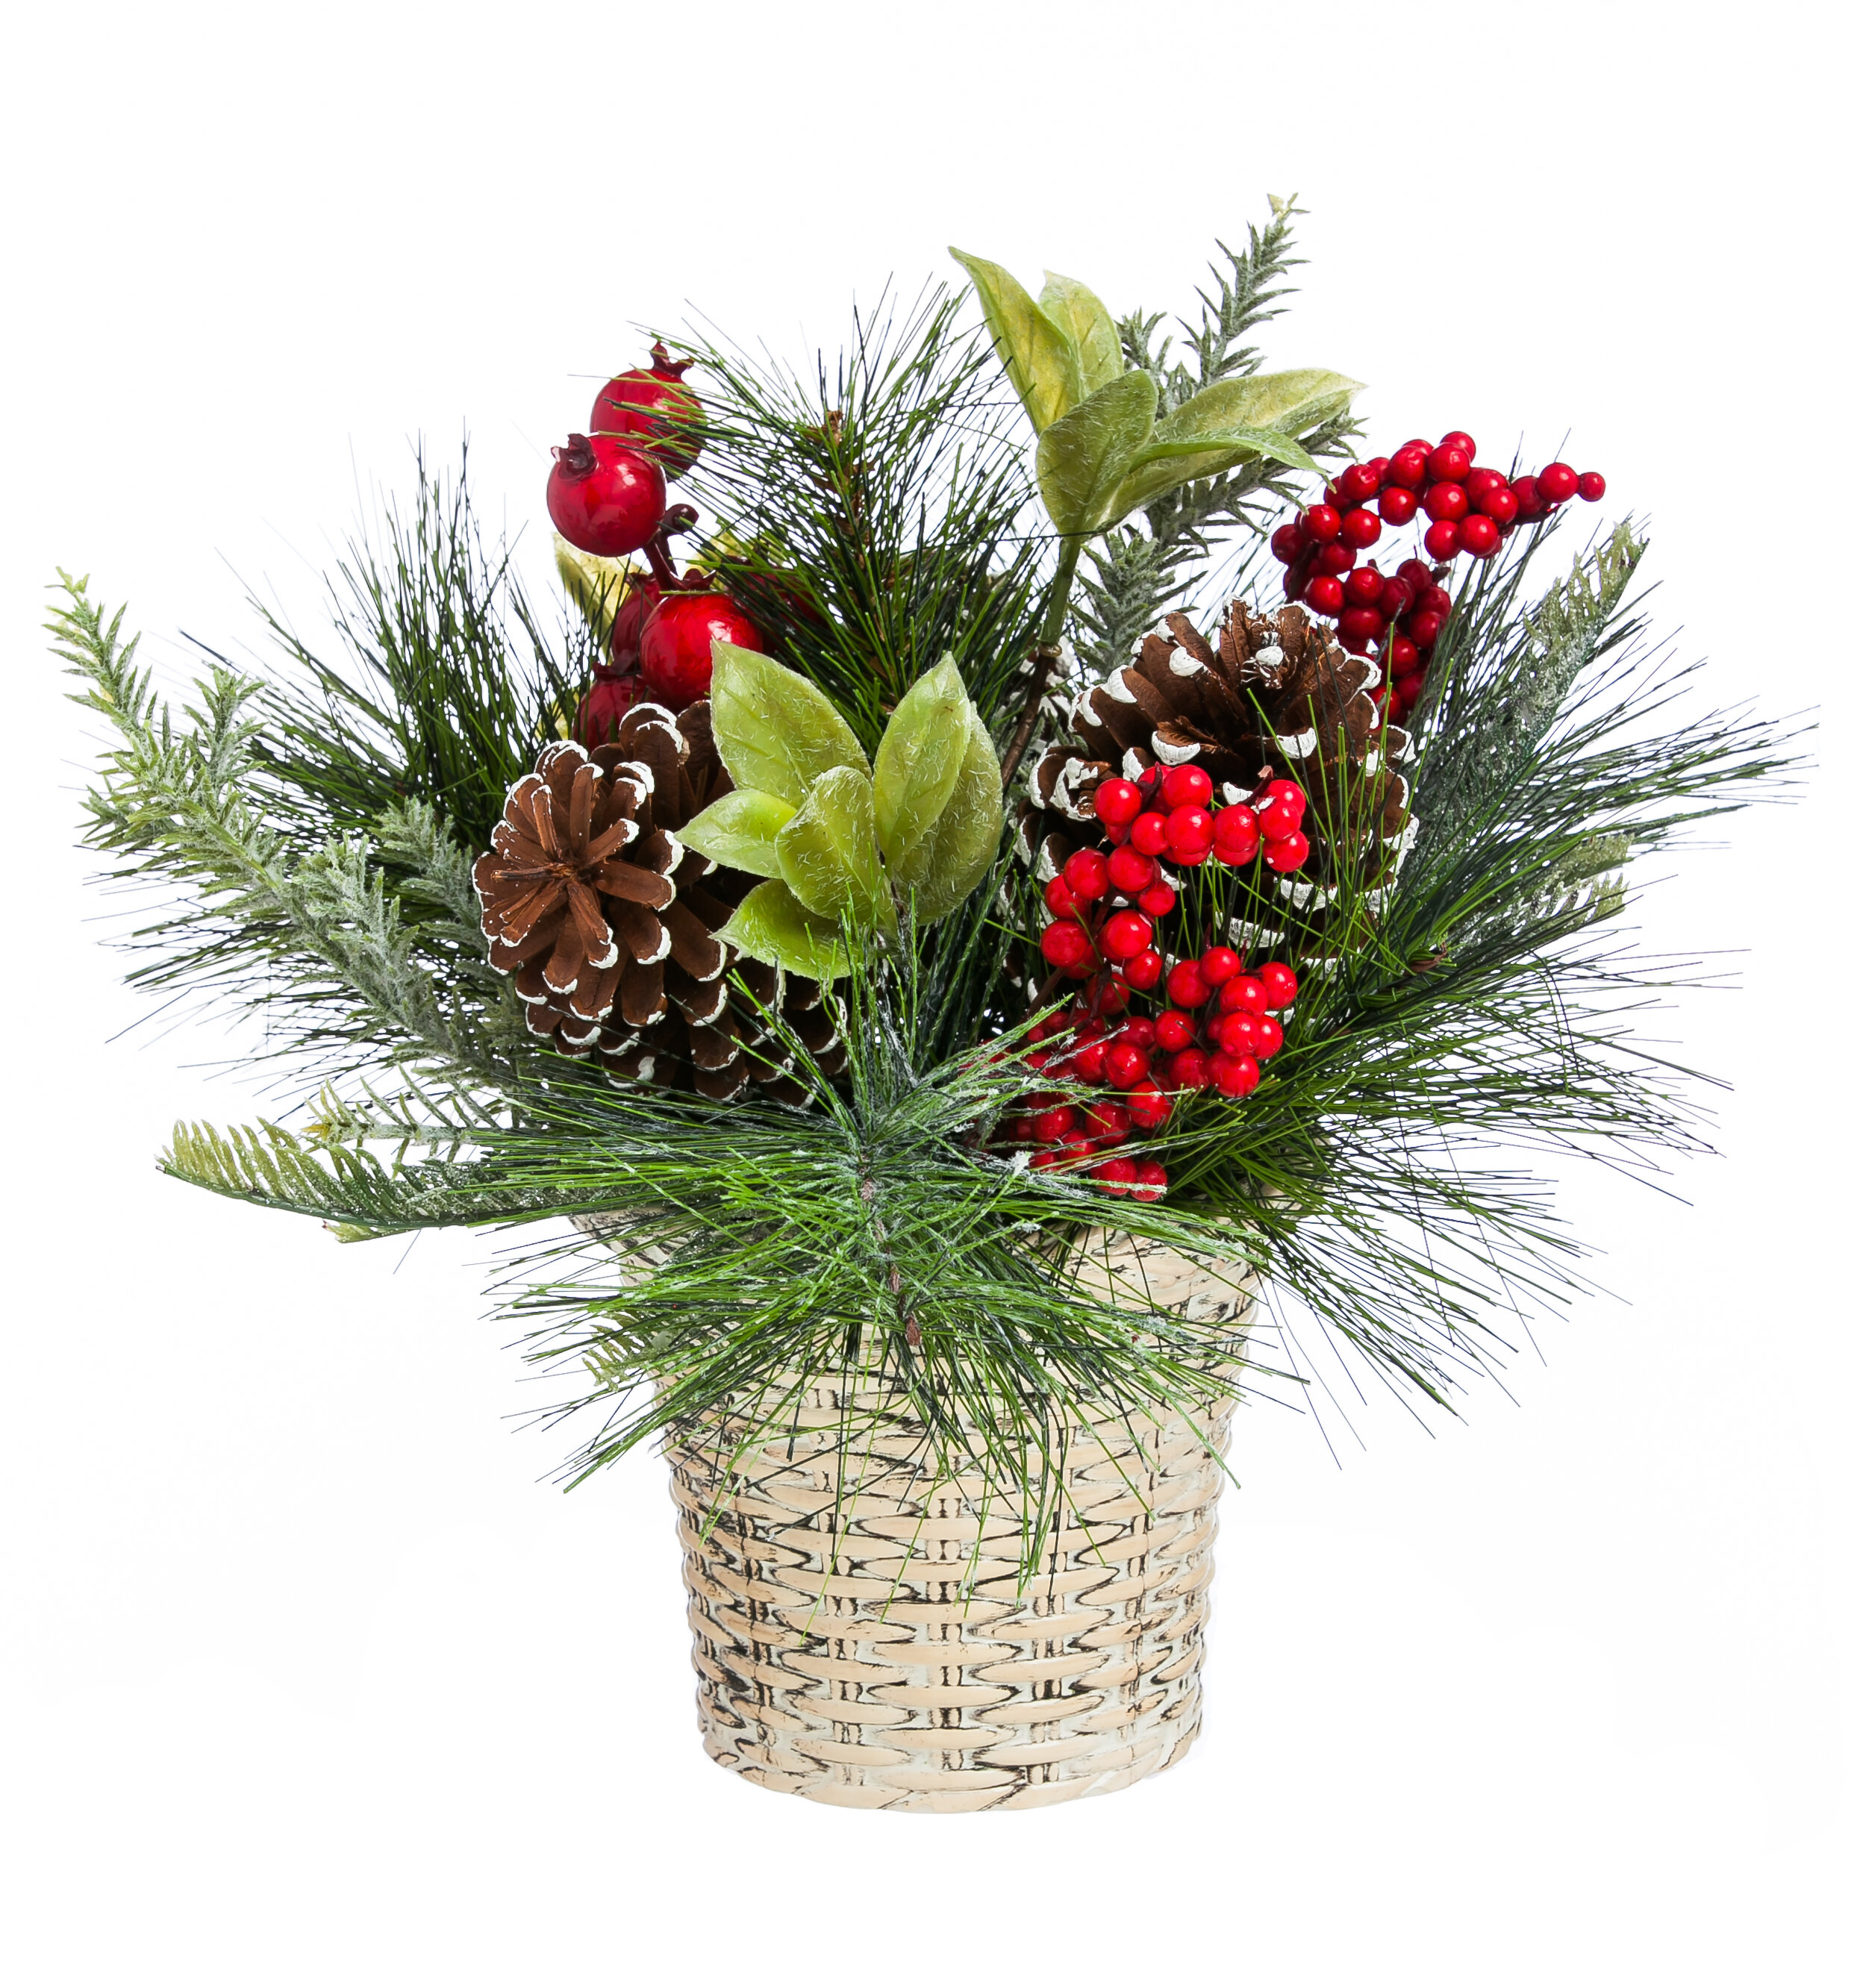 26cm Mini Small Christmas Artificial Flower Branch Leaves Pinecones Holly Décor 